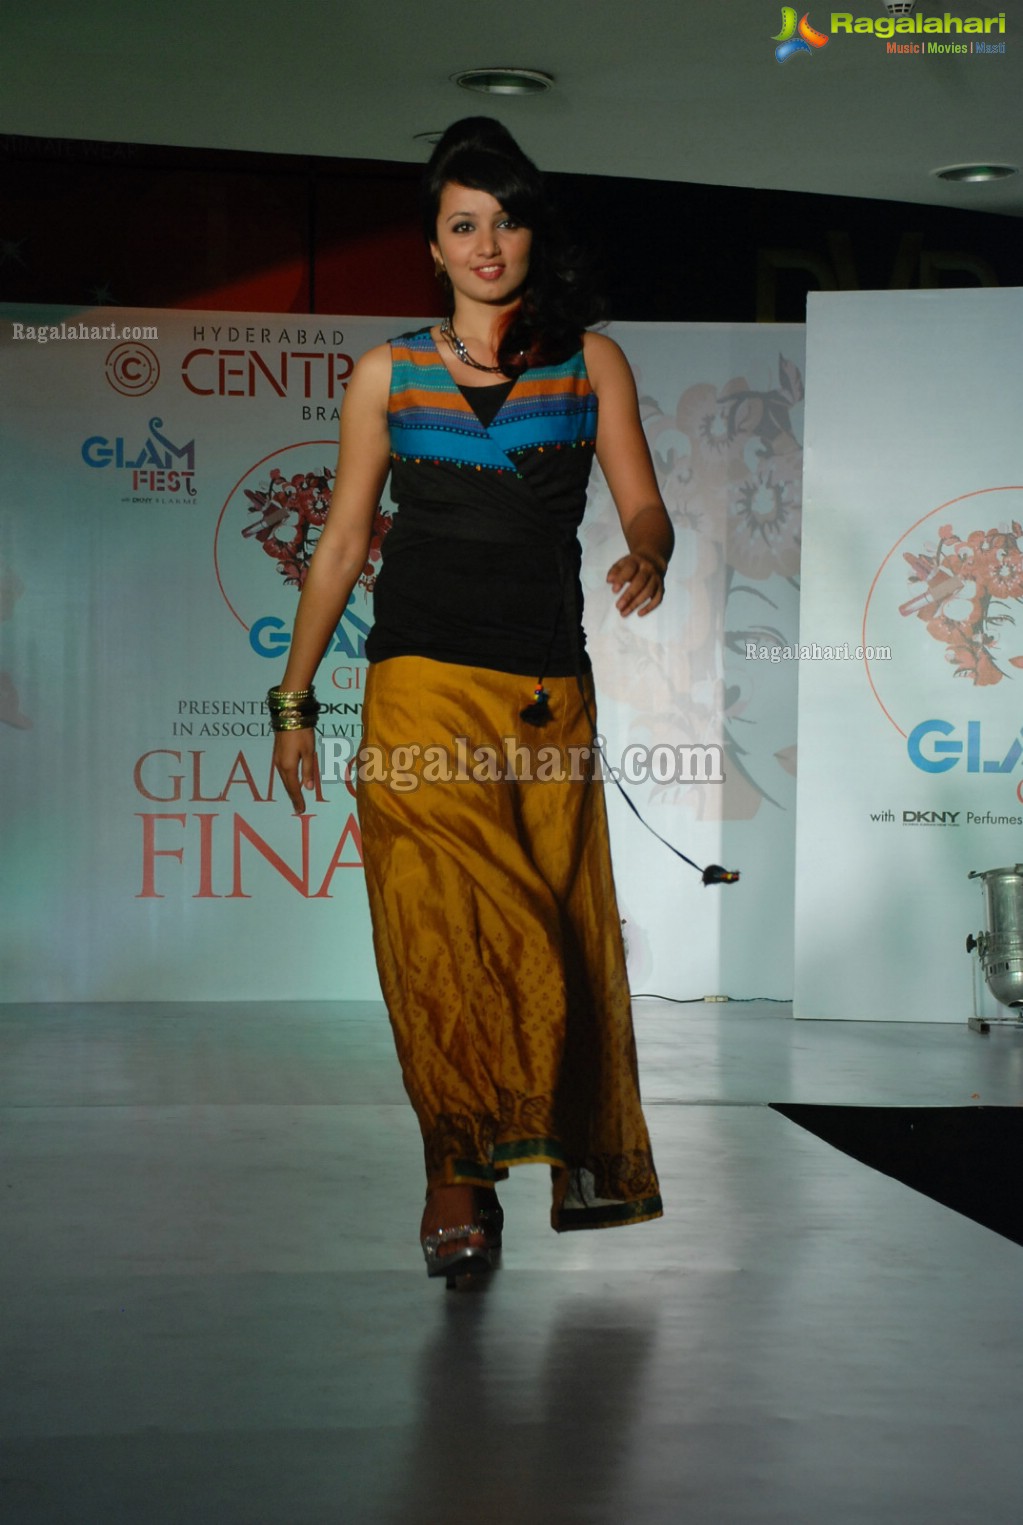 Glam Fest at Hyderabad Central